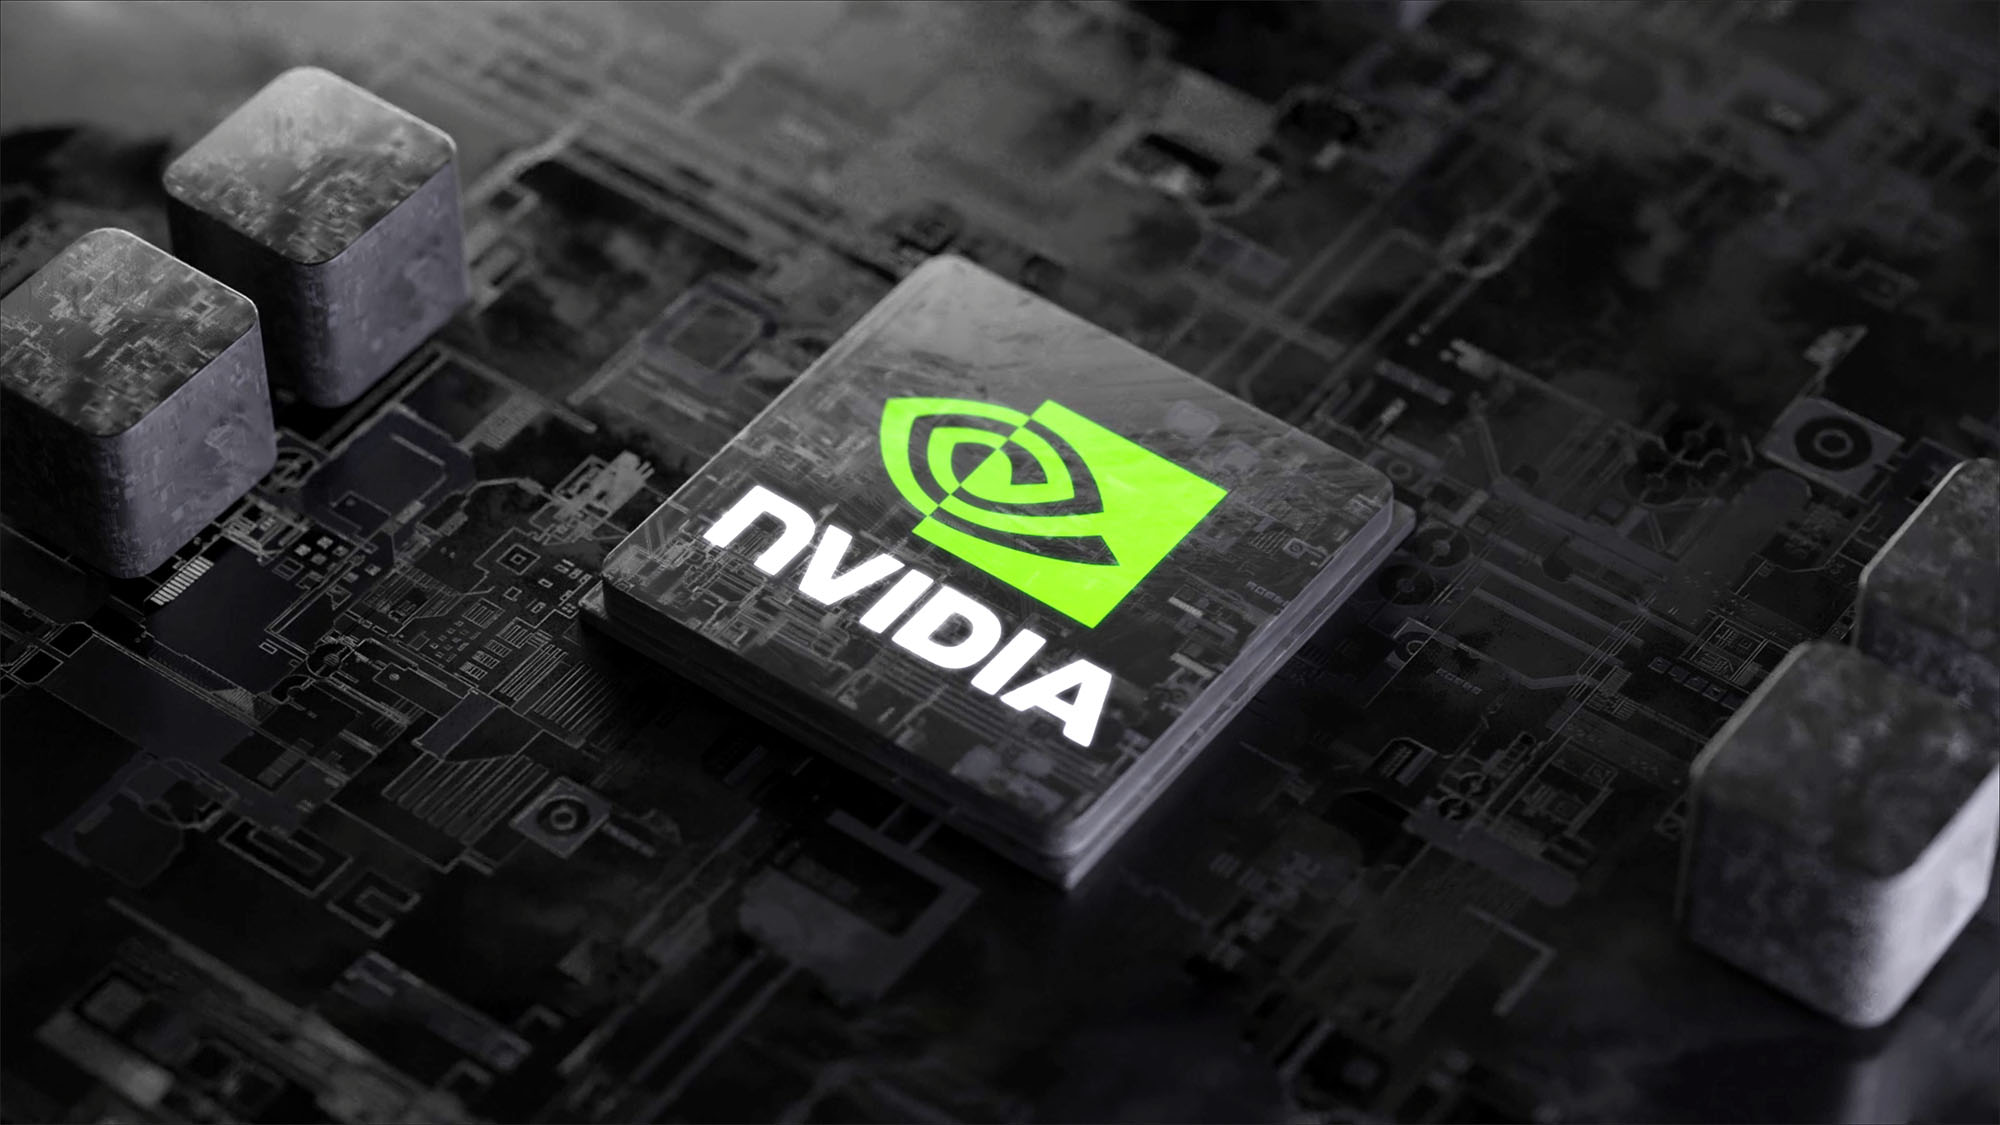 Nvidia announces availability of DGX Cloud on Oracle Cloud Infrastructure for generative AI training?